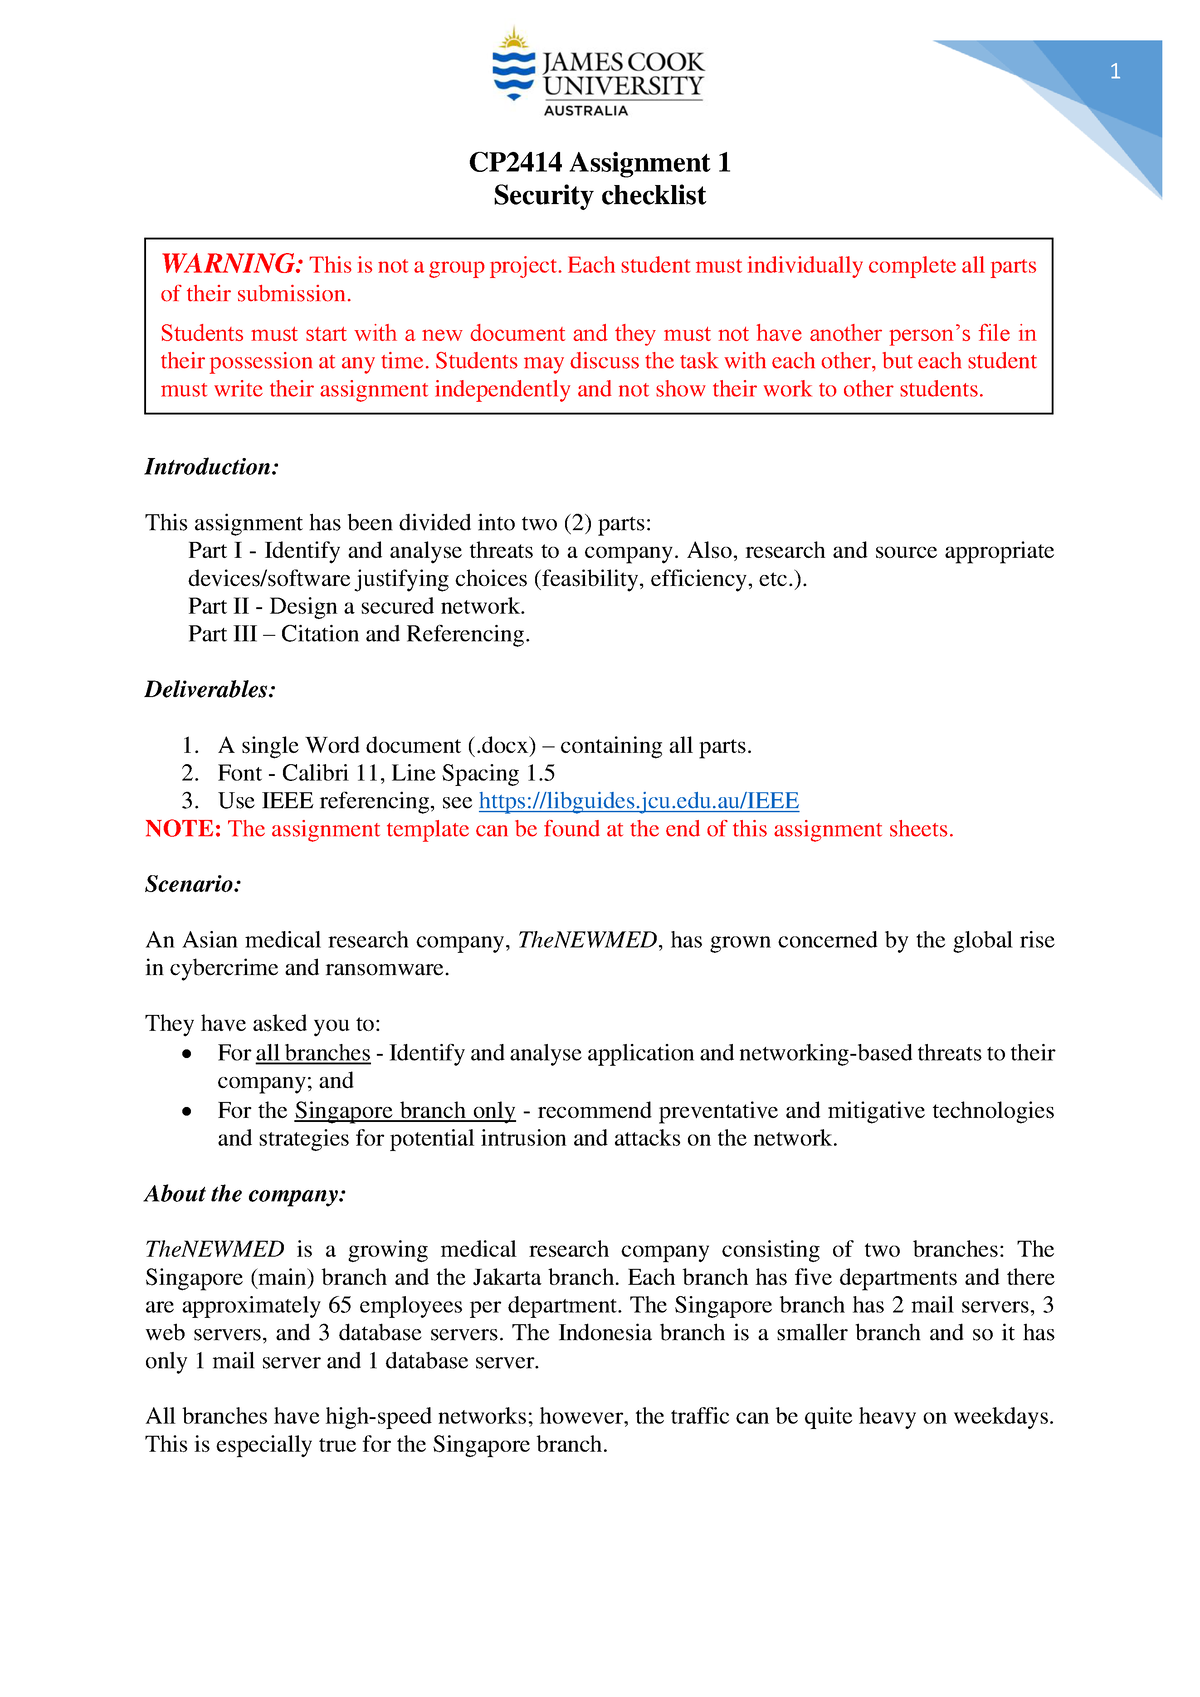 security assignment instructions uk